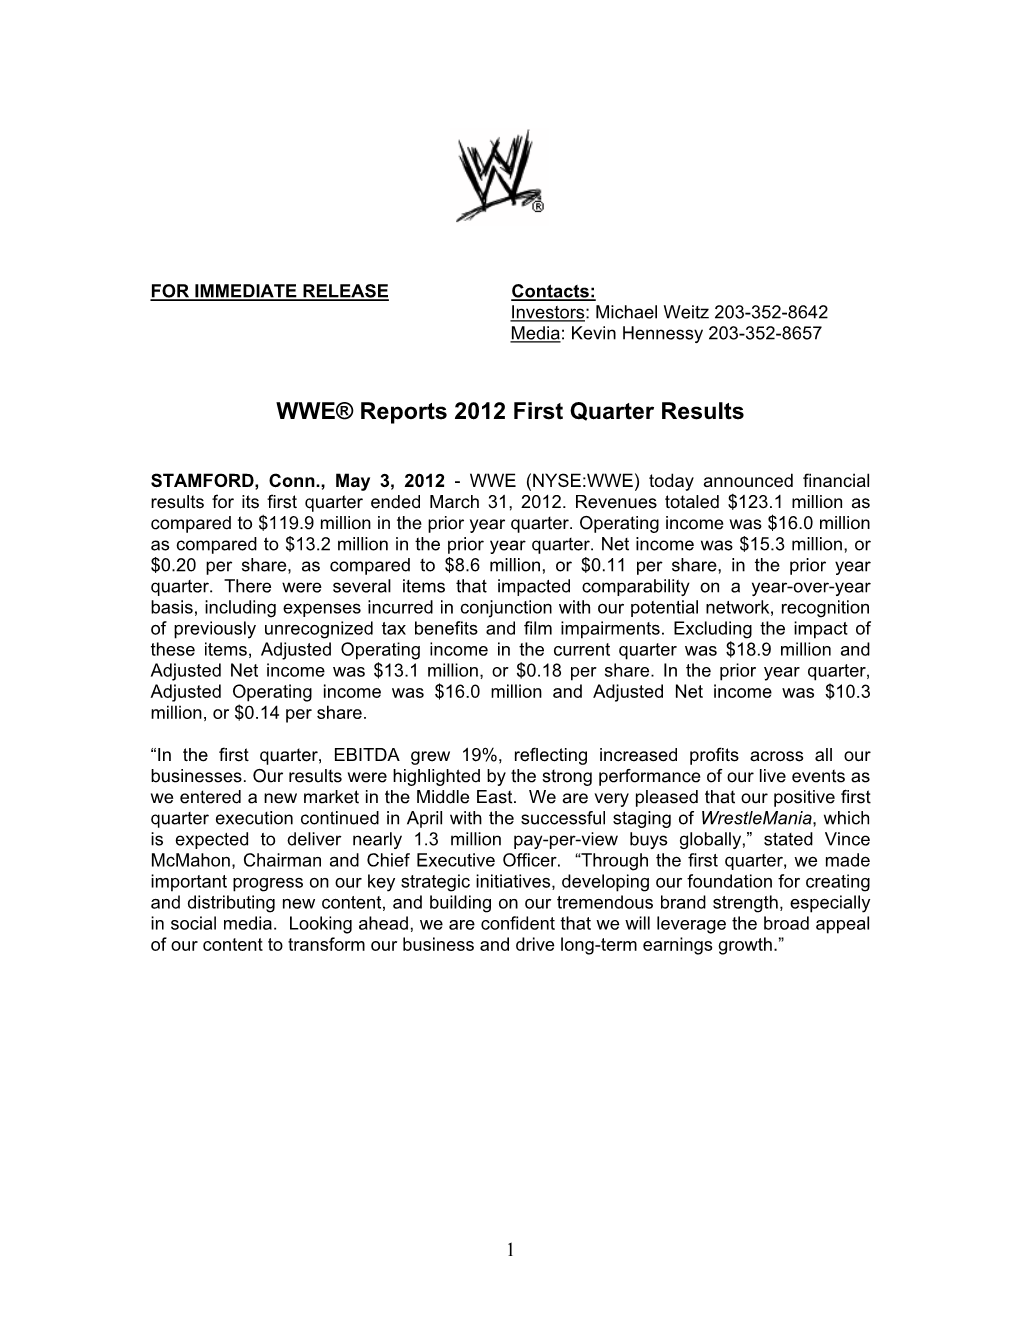 WWE® Reports 2012 First Quarter Results